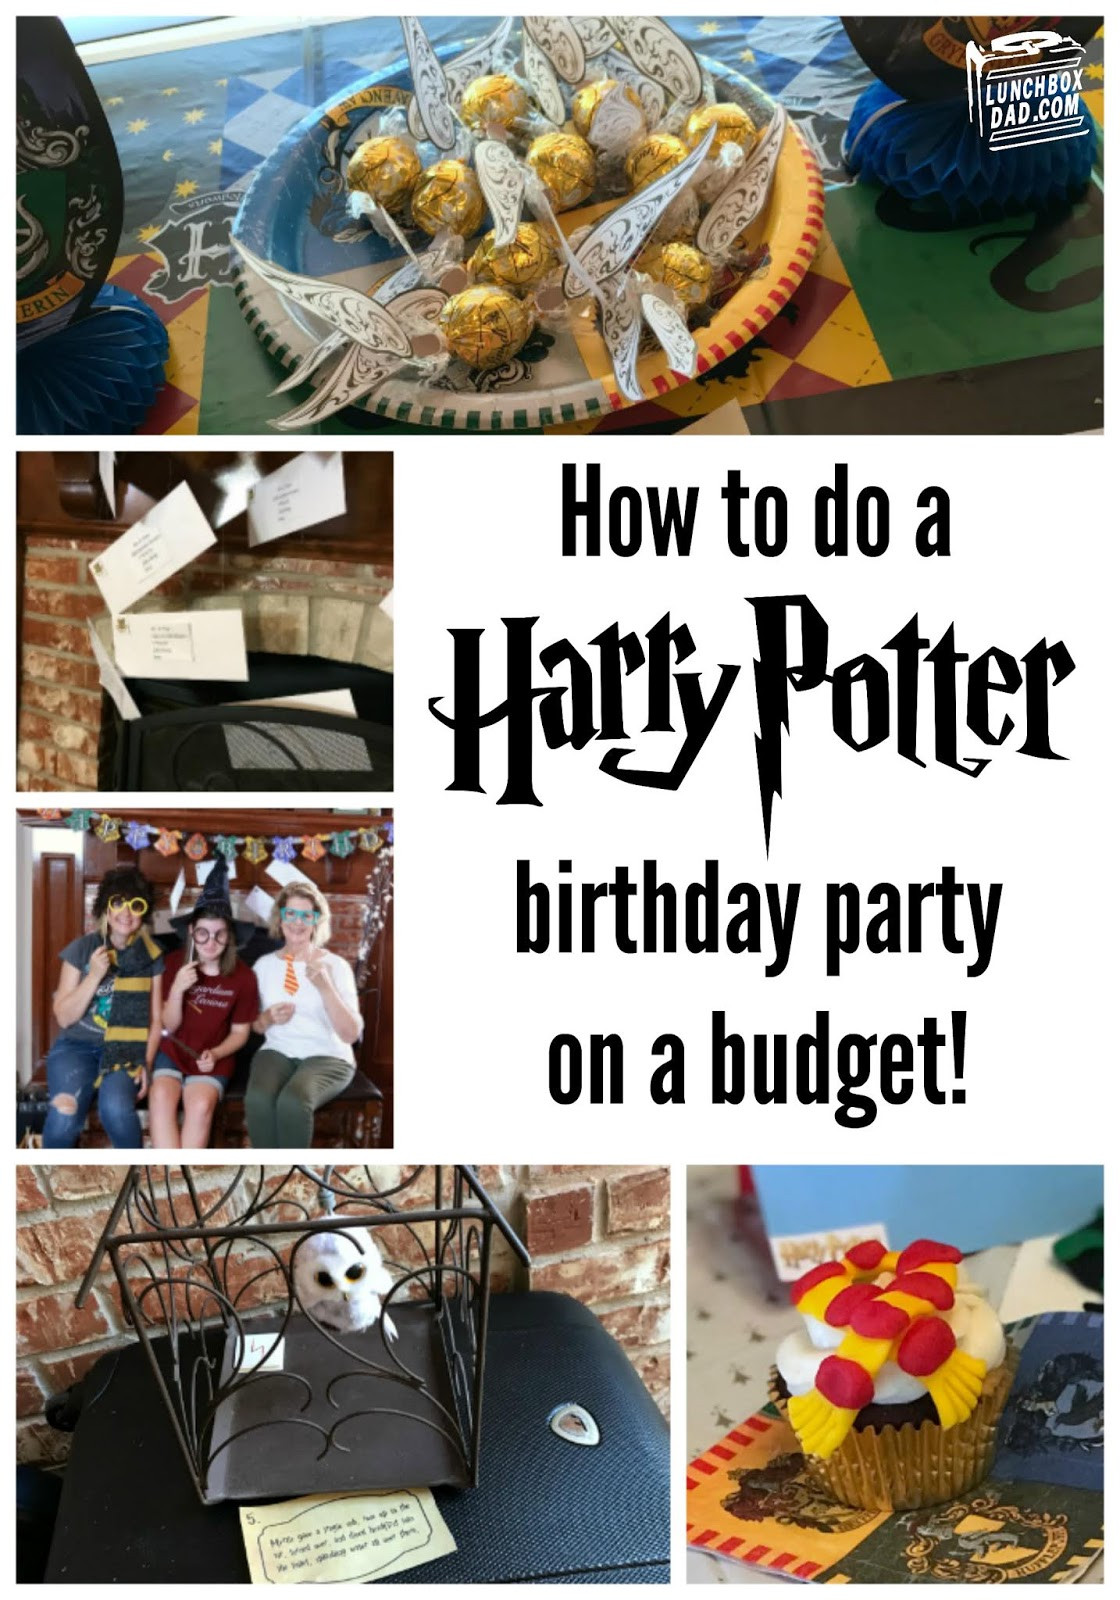 Harry Potter Birthday Party Ideas
 Lunchbox Dad Harry Potter Birthday Party Ideas on a Bud